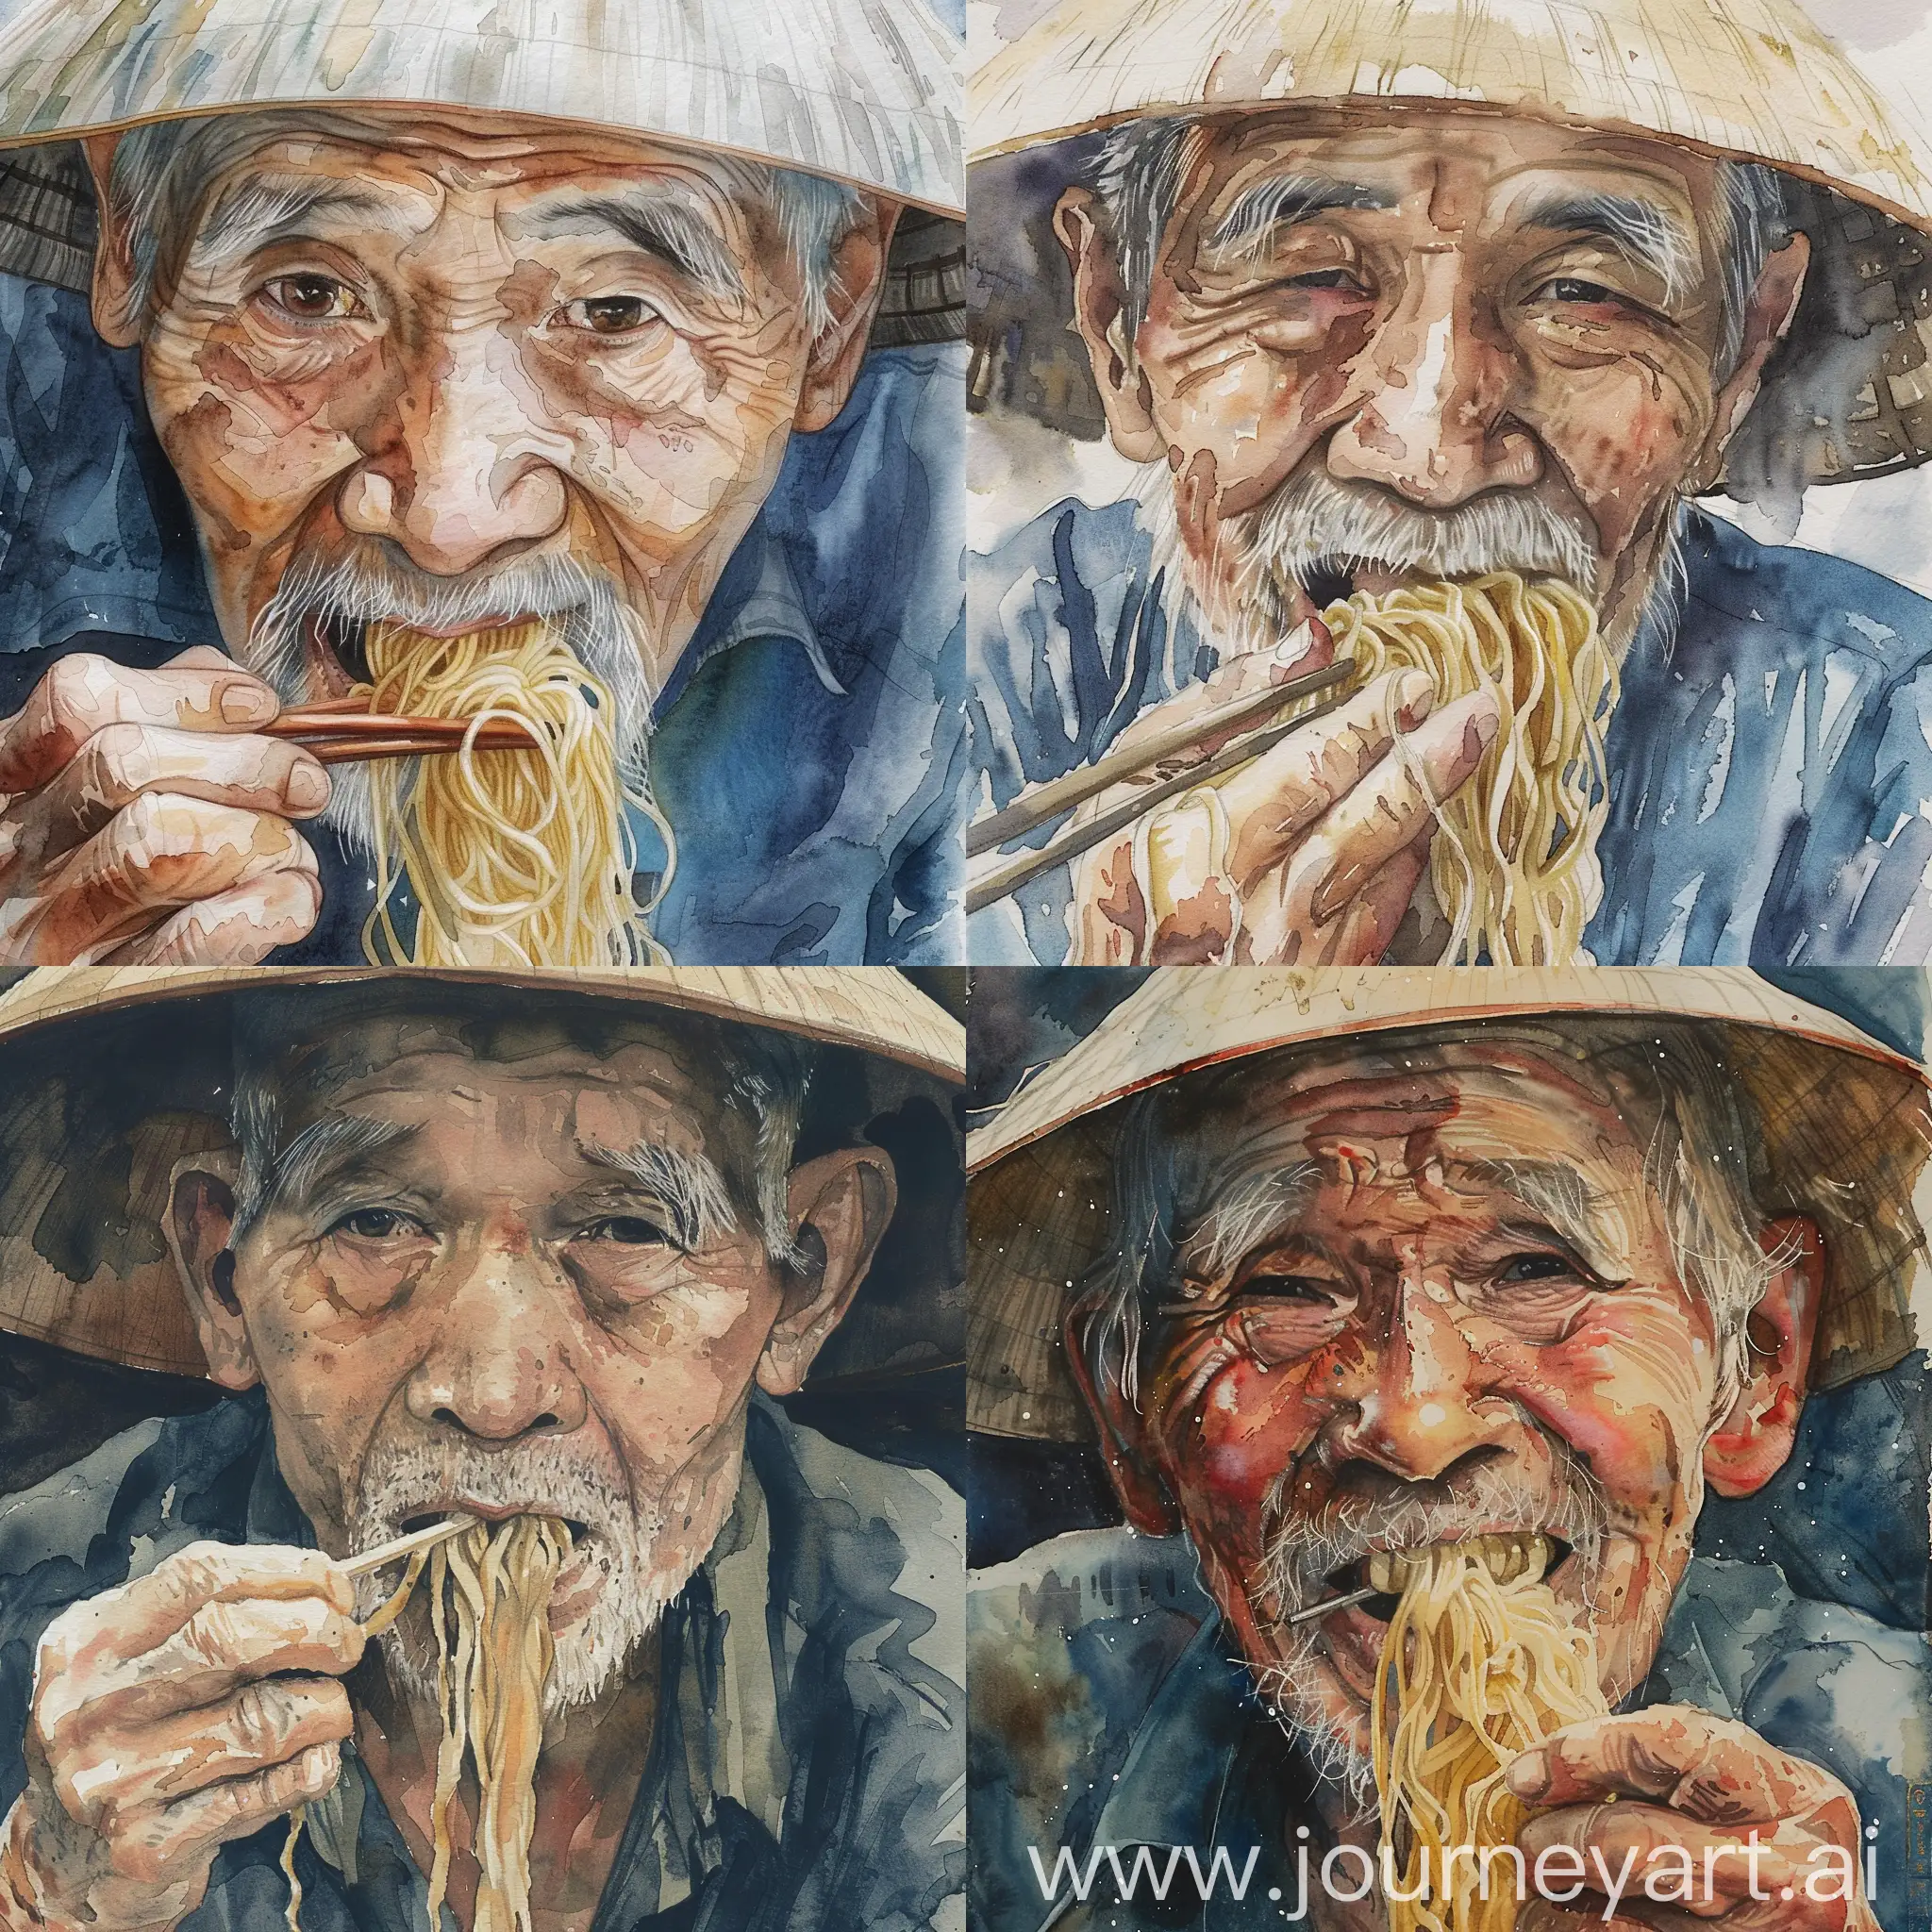 watercolor ilustration of a vietnamese old man eating noodle,close-up, in high quality watercolor style